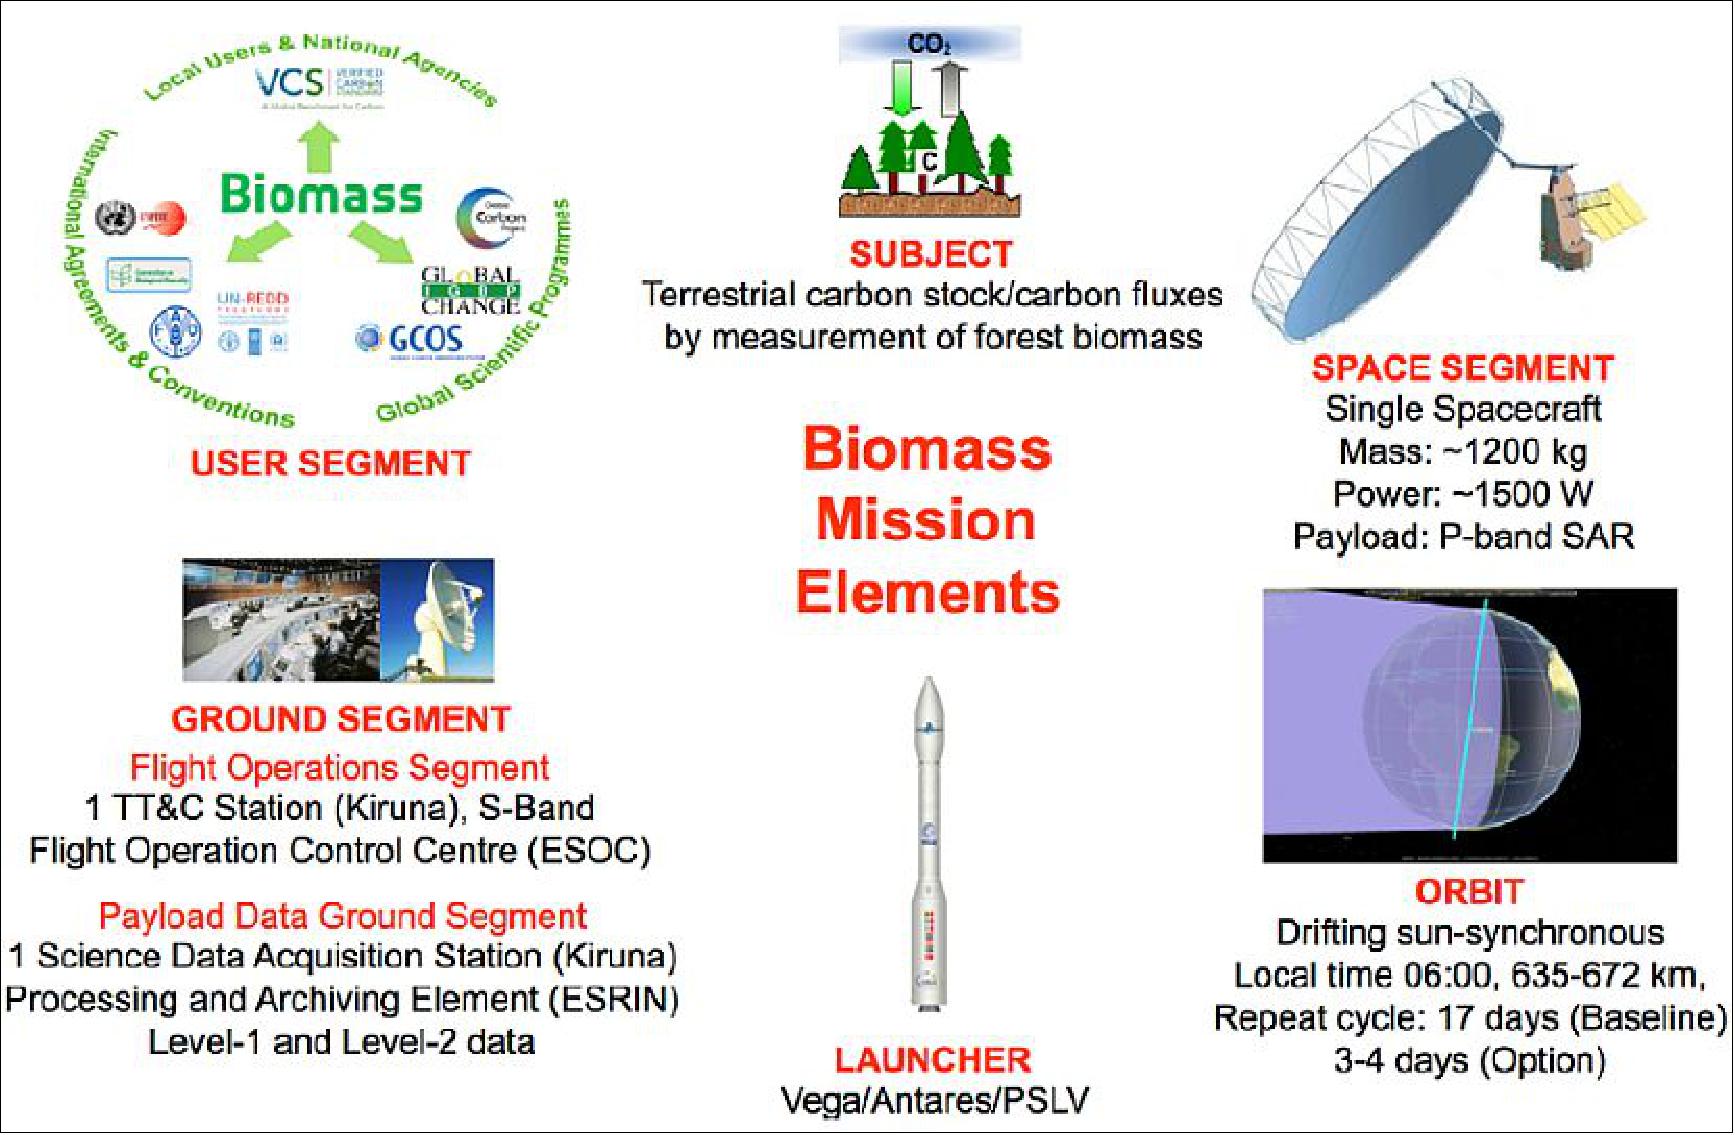 Figure 2: Overview of the Biomass architecture (image credit: ESA, Ref. 2)